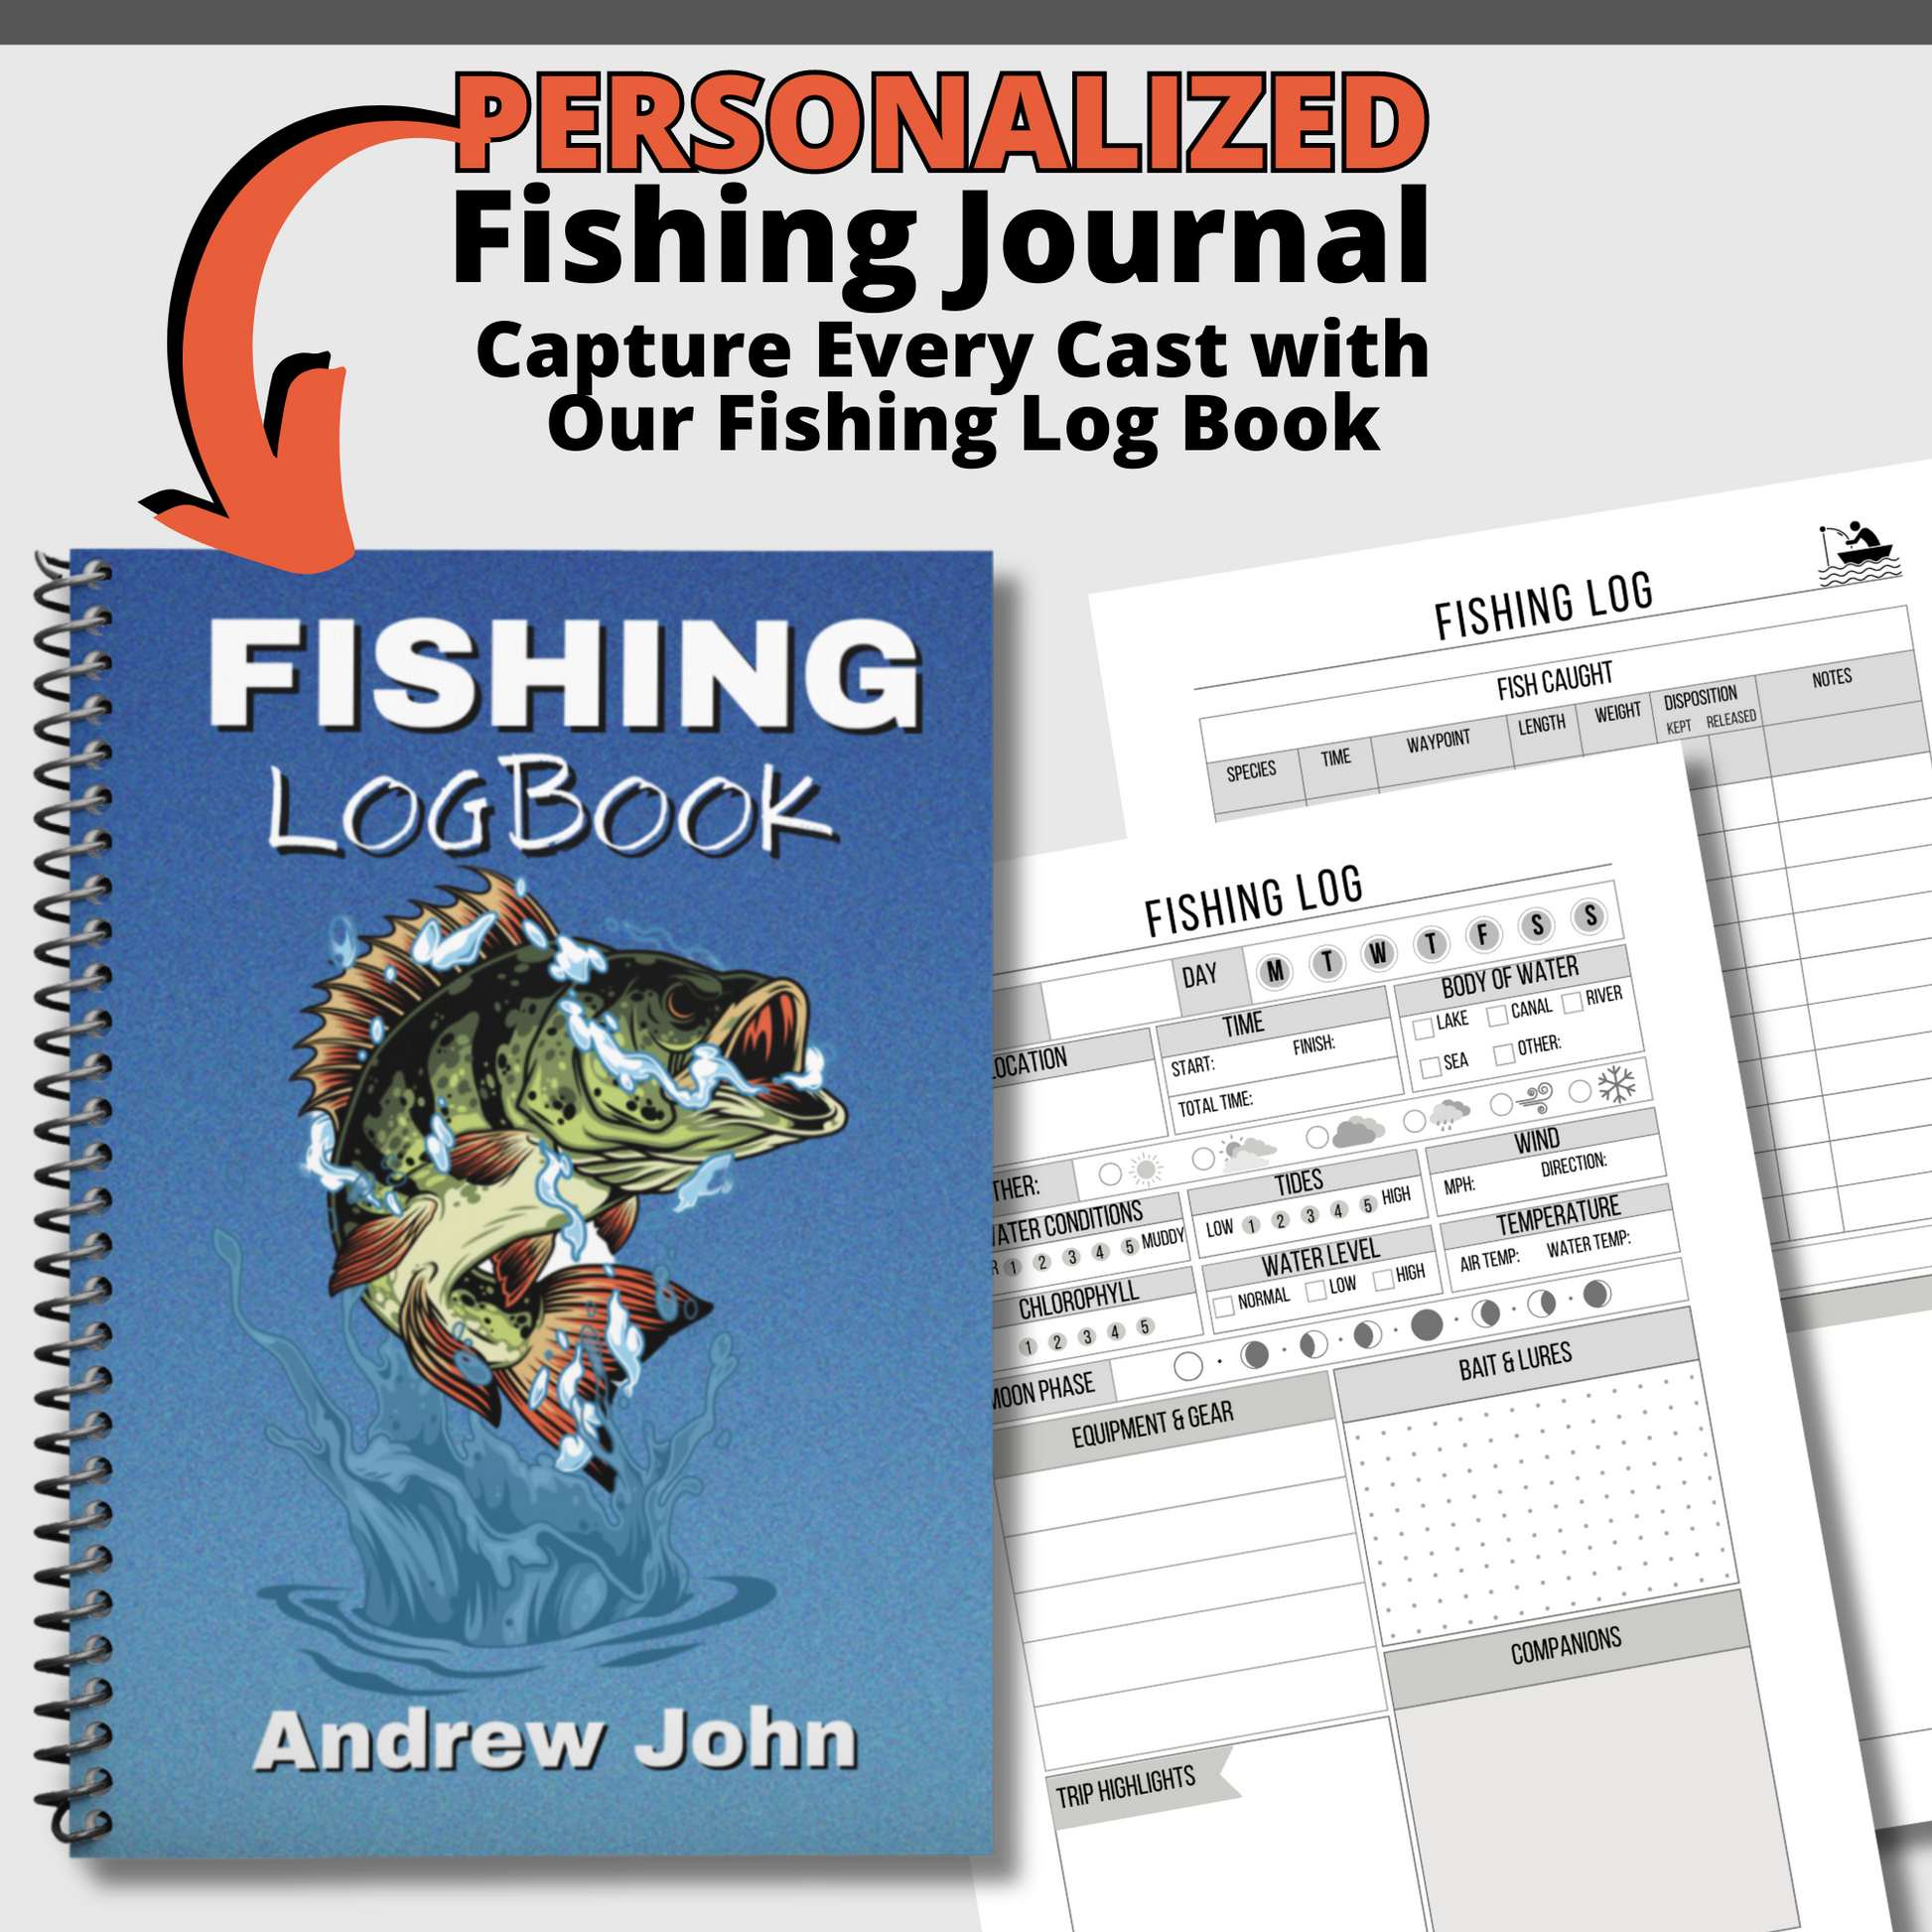 Tug is My Drug: Fishing Log and Activity for Kids Book Journal on